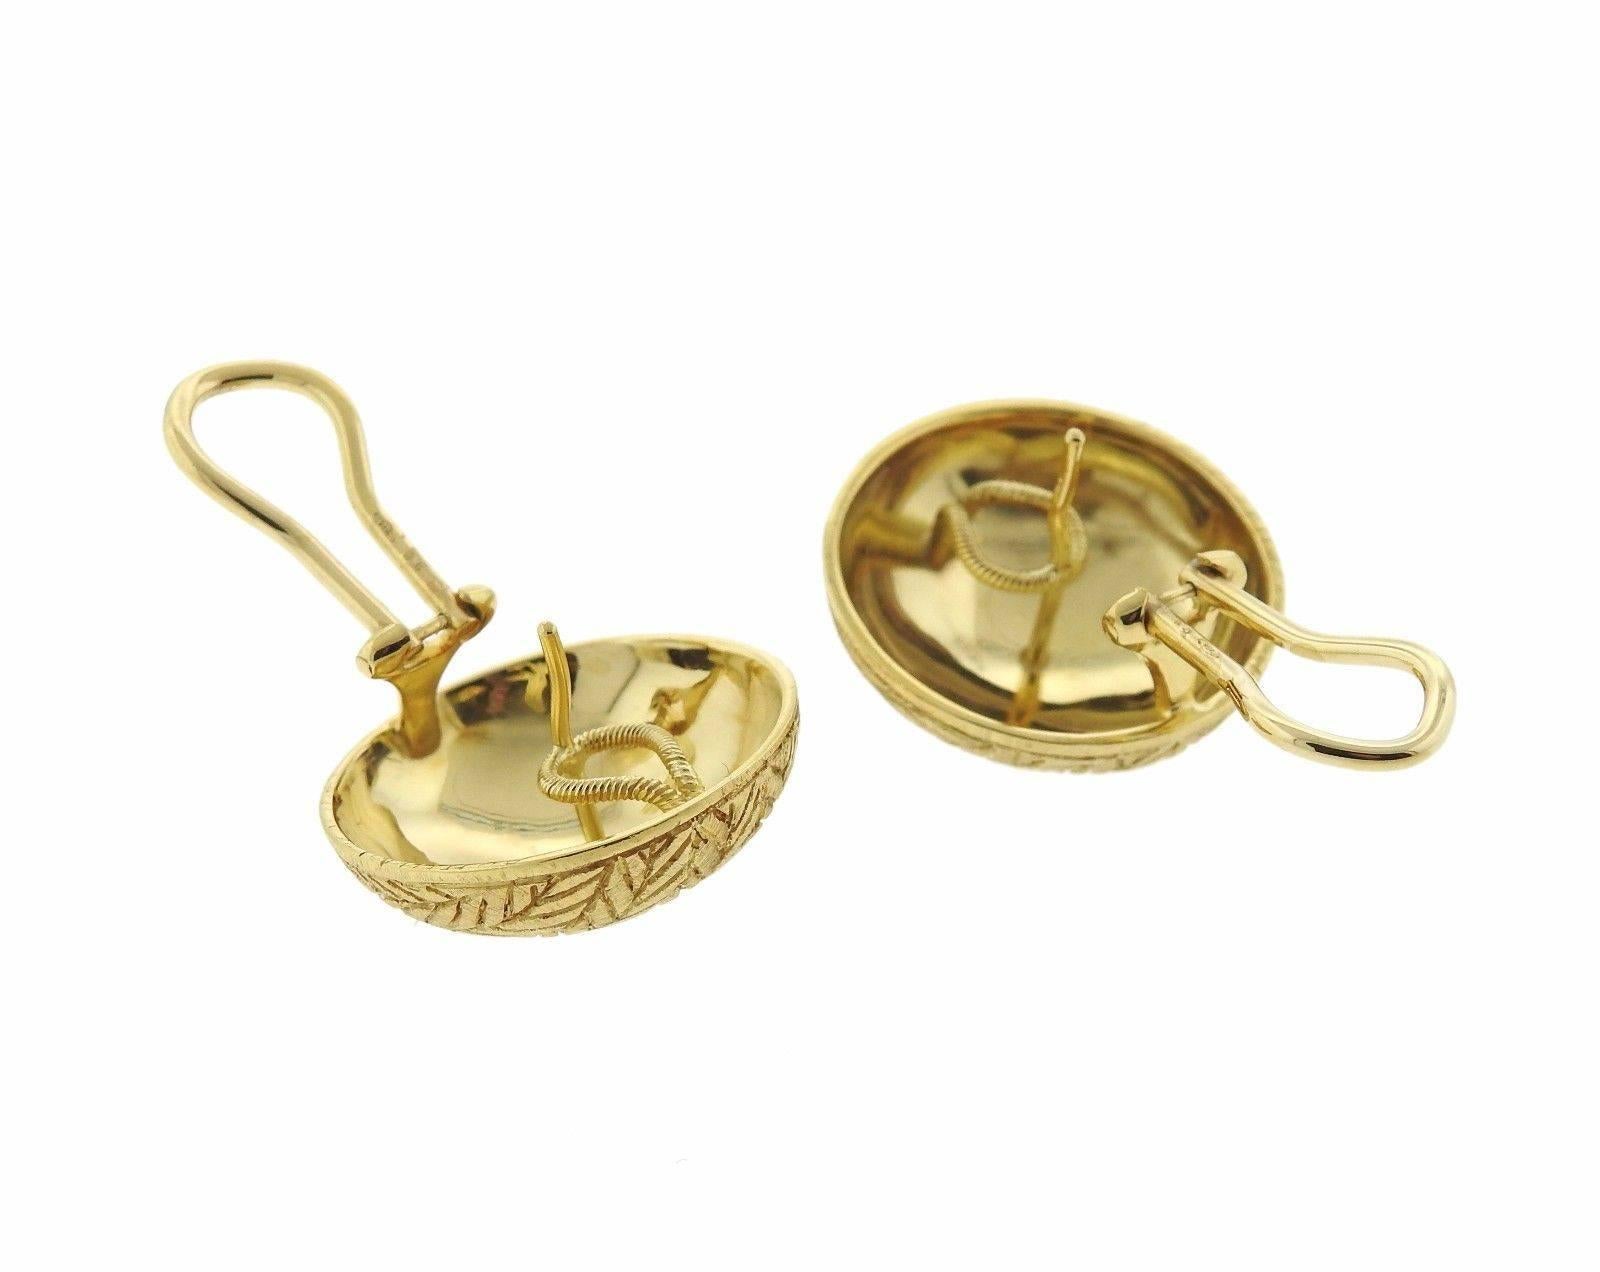 A pair of 18k gold button earrings.  The earrings measure 21.3mm in diameter and weigh 15 grams.  Marked: Buccellati 18KT Italy.  The current retail is $5110.